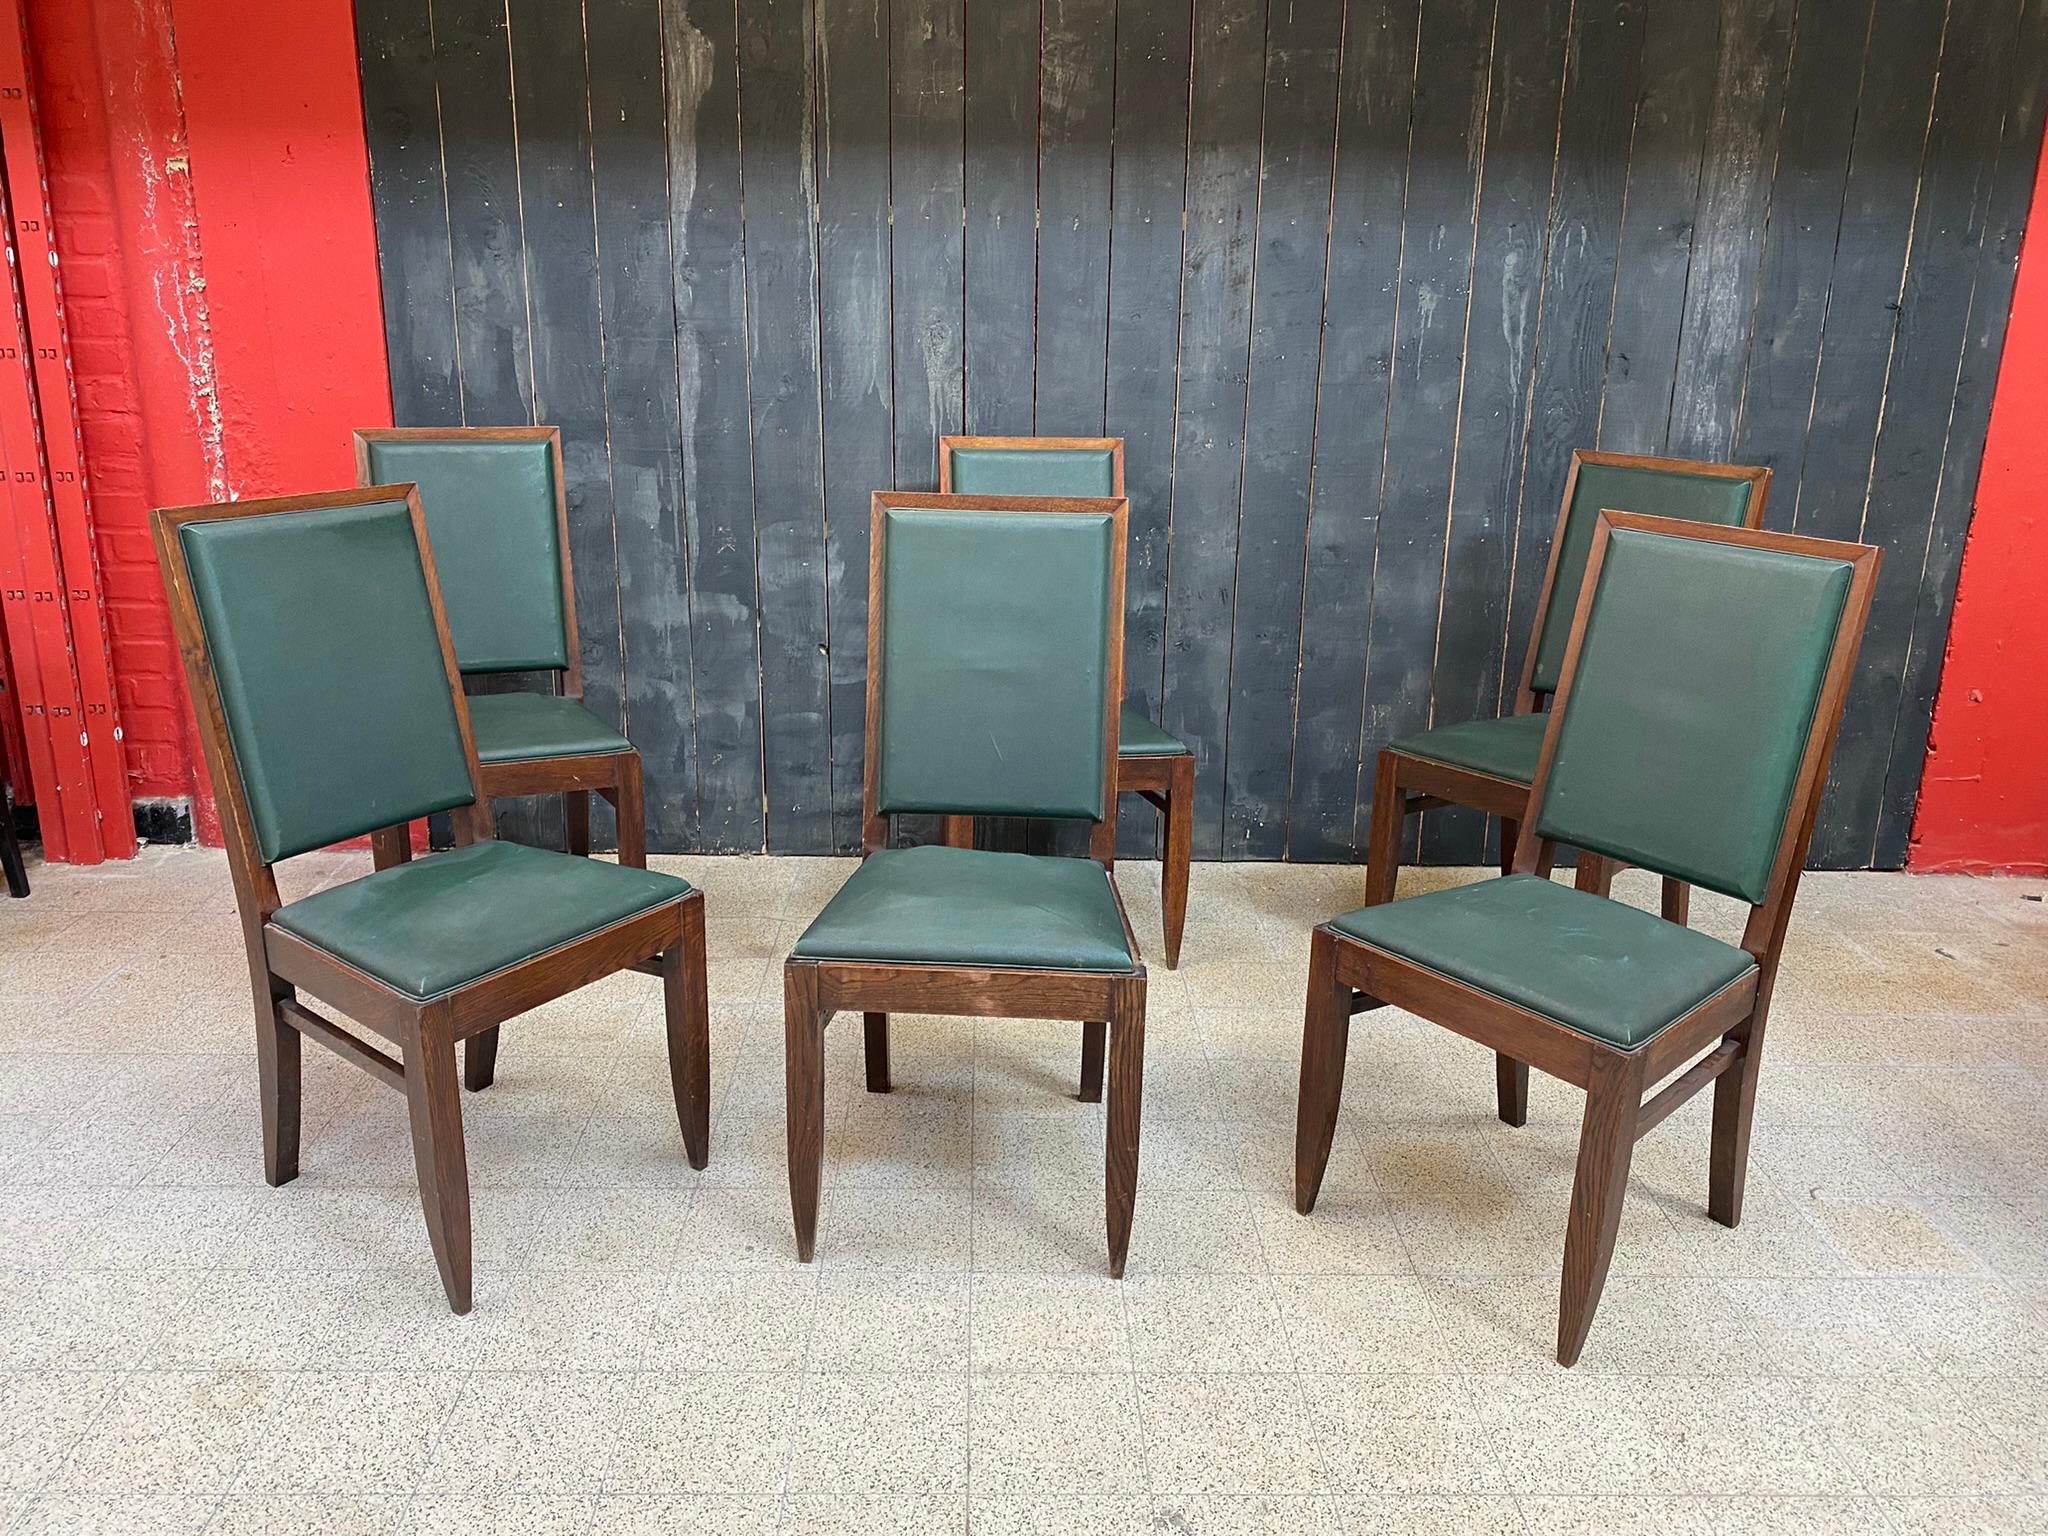 Gaston Poisson, set of six Art Deco chairs in oak circa 1930/1940
the coating needs to be changed.